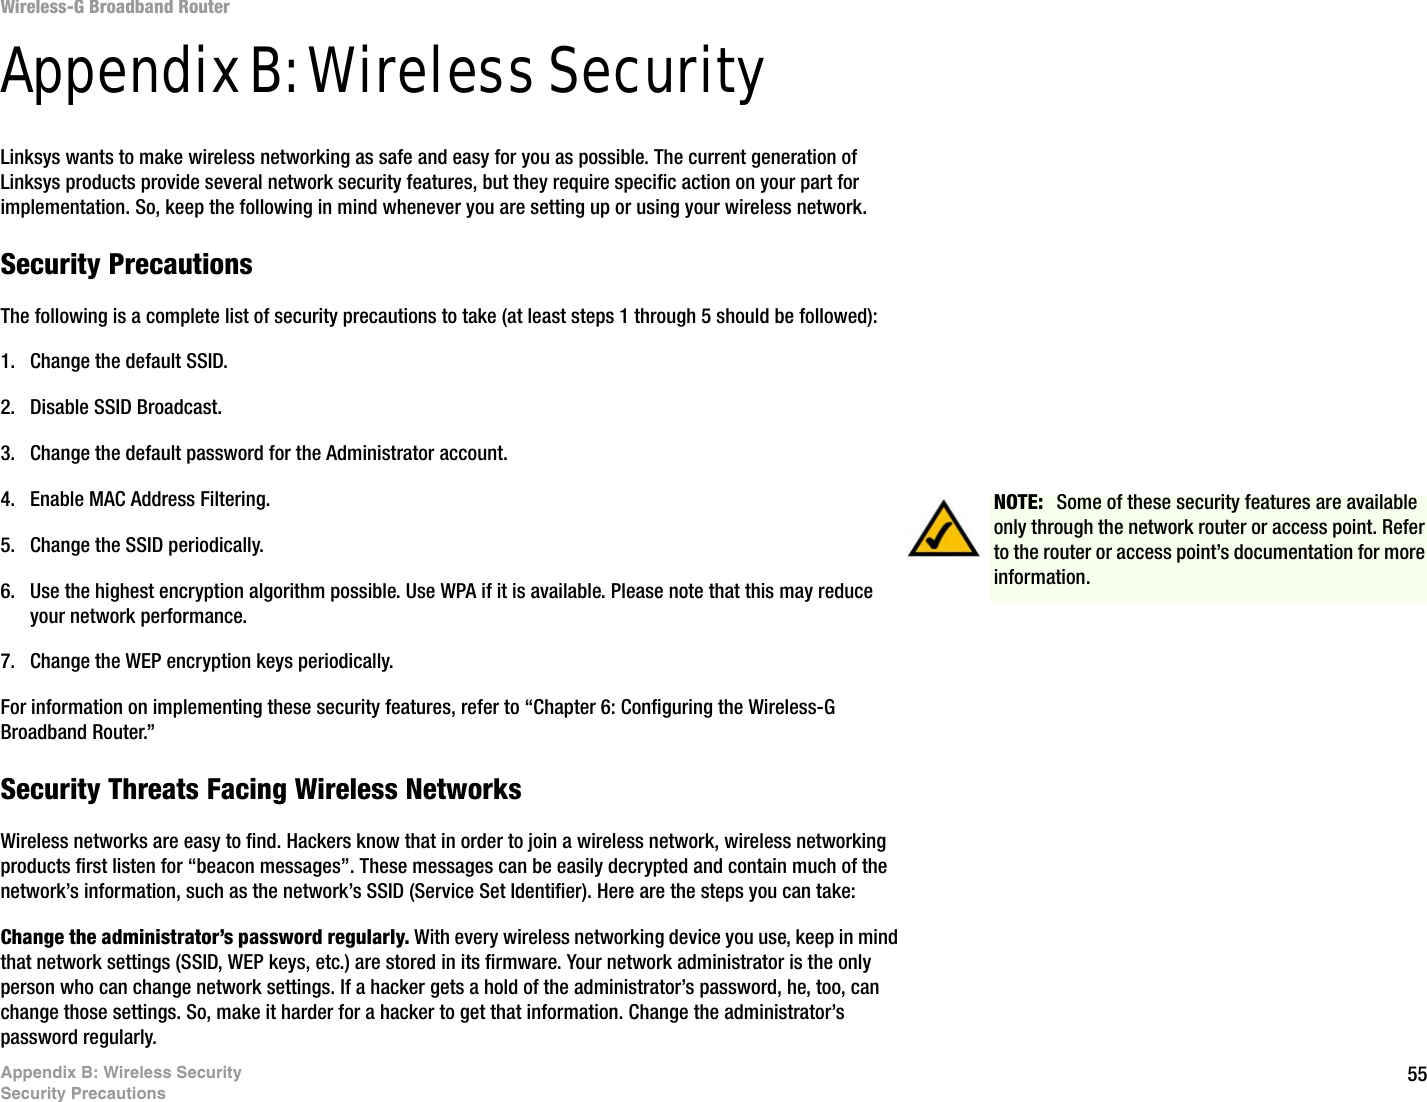 55Appendix B: Wireless SecuritySecurity PrecautionsWireless-G Broadband RouterAppendix B: Wireless SecurityLinksys wants to make wireless networking as safe and easy for you as possible. The current generation of Linksys products provide several network security features, but they require specific action on your part for implementation. So, keep the following in mind whenever you are setting up or using your wireless network.Security PrecautionsThe following is a complete list of security precautions to take (at least steps 1 through 5 should be followed):1. Change the default SSID. 2. Disable SSID Broadcast. 3. Change the default password for the Administrator account. 4. Enable MAC Address Filtering. 5. Change the SSID periodically. 6. Use the highest encryption algorithm possible. Use WPA if it is available. Please note that this may reduce your network performance. 7. Change the WEP encryption keys periodically. For information on implementing these security features, refer to “Chapter 6: Configuring the Wireless-G Broadband Router.”Security Threats Facing Wireless Networks Wireless networks are easy to find. Hackers know that in order to join a wireless network, wireless networking products first listen for “beacon messages”. These messages can be easily decrypted and contain much of the network’s information, such as the network’s SSID (Service Set Identifier). Here are the steps you can take:Change the administrator’s password regularly. With every wireless networking device you use, keep in mind that network settings (SSID, WEP keys, etc.) are stored in its firmware. Your network administrator is the only person who can change network settings. If a hacker gets a hold of the administrator’s password, he, too, can change those settings. So, make it harder for a hacker to get that information. Change the administrator’s password regularly.NOTE:  Some of these security features are available only through the network router or access point. Refer to the router or access point’s documentation for more information.